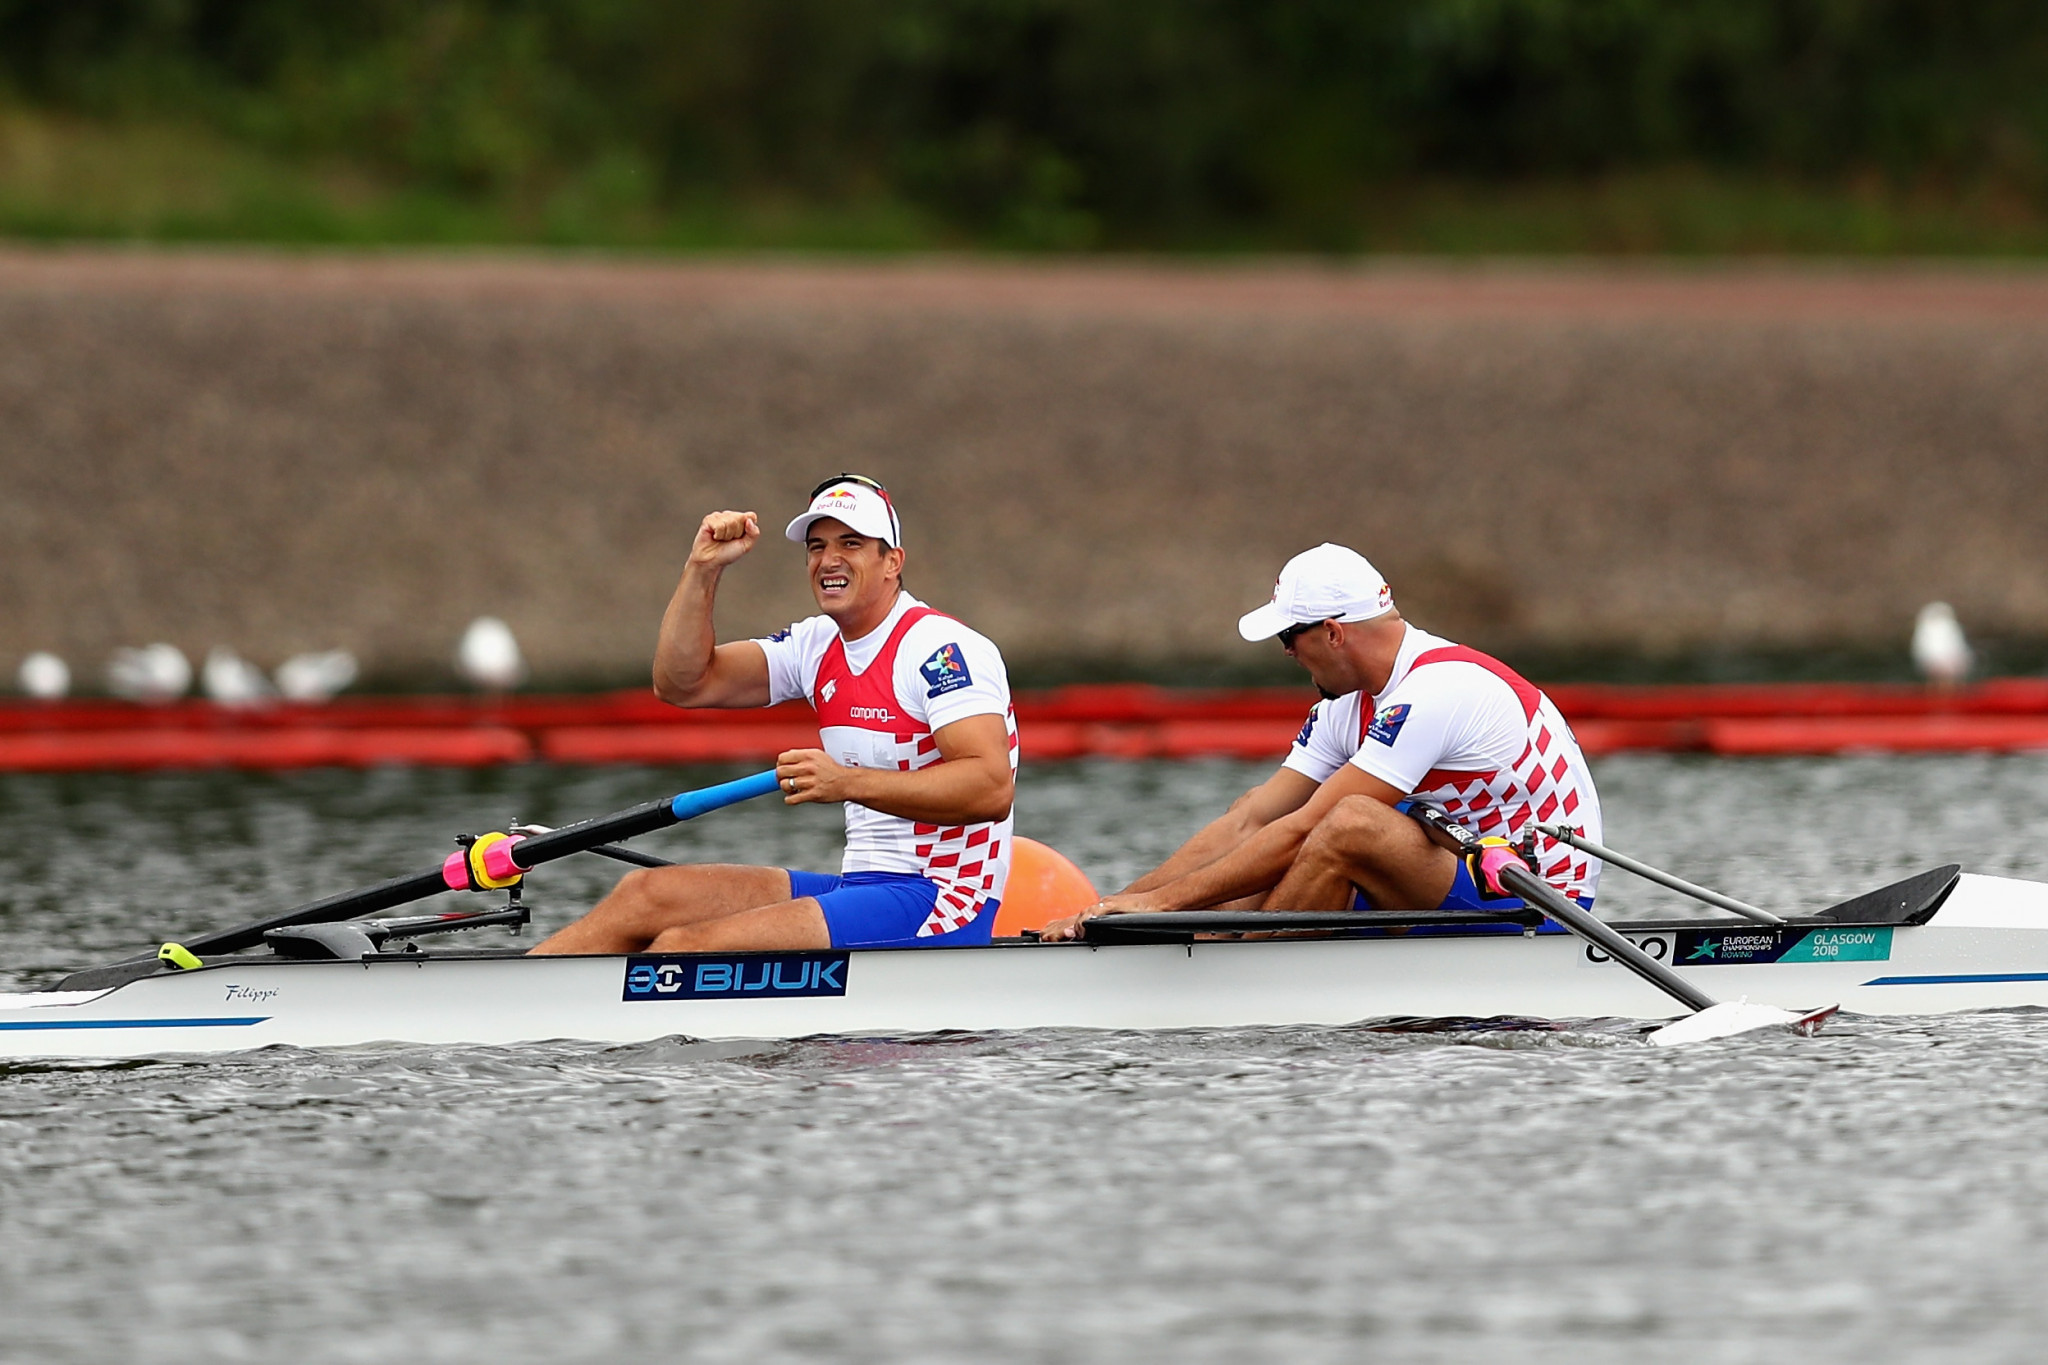 Croatia's Martin and Sinković brothers set to impress at opening 2019 World Rowing Cup in Plovdiv 